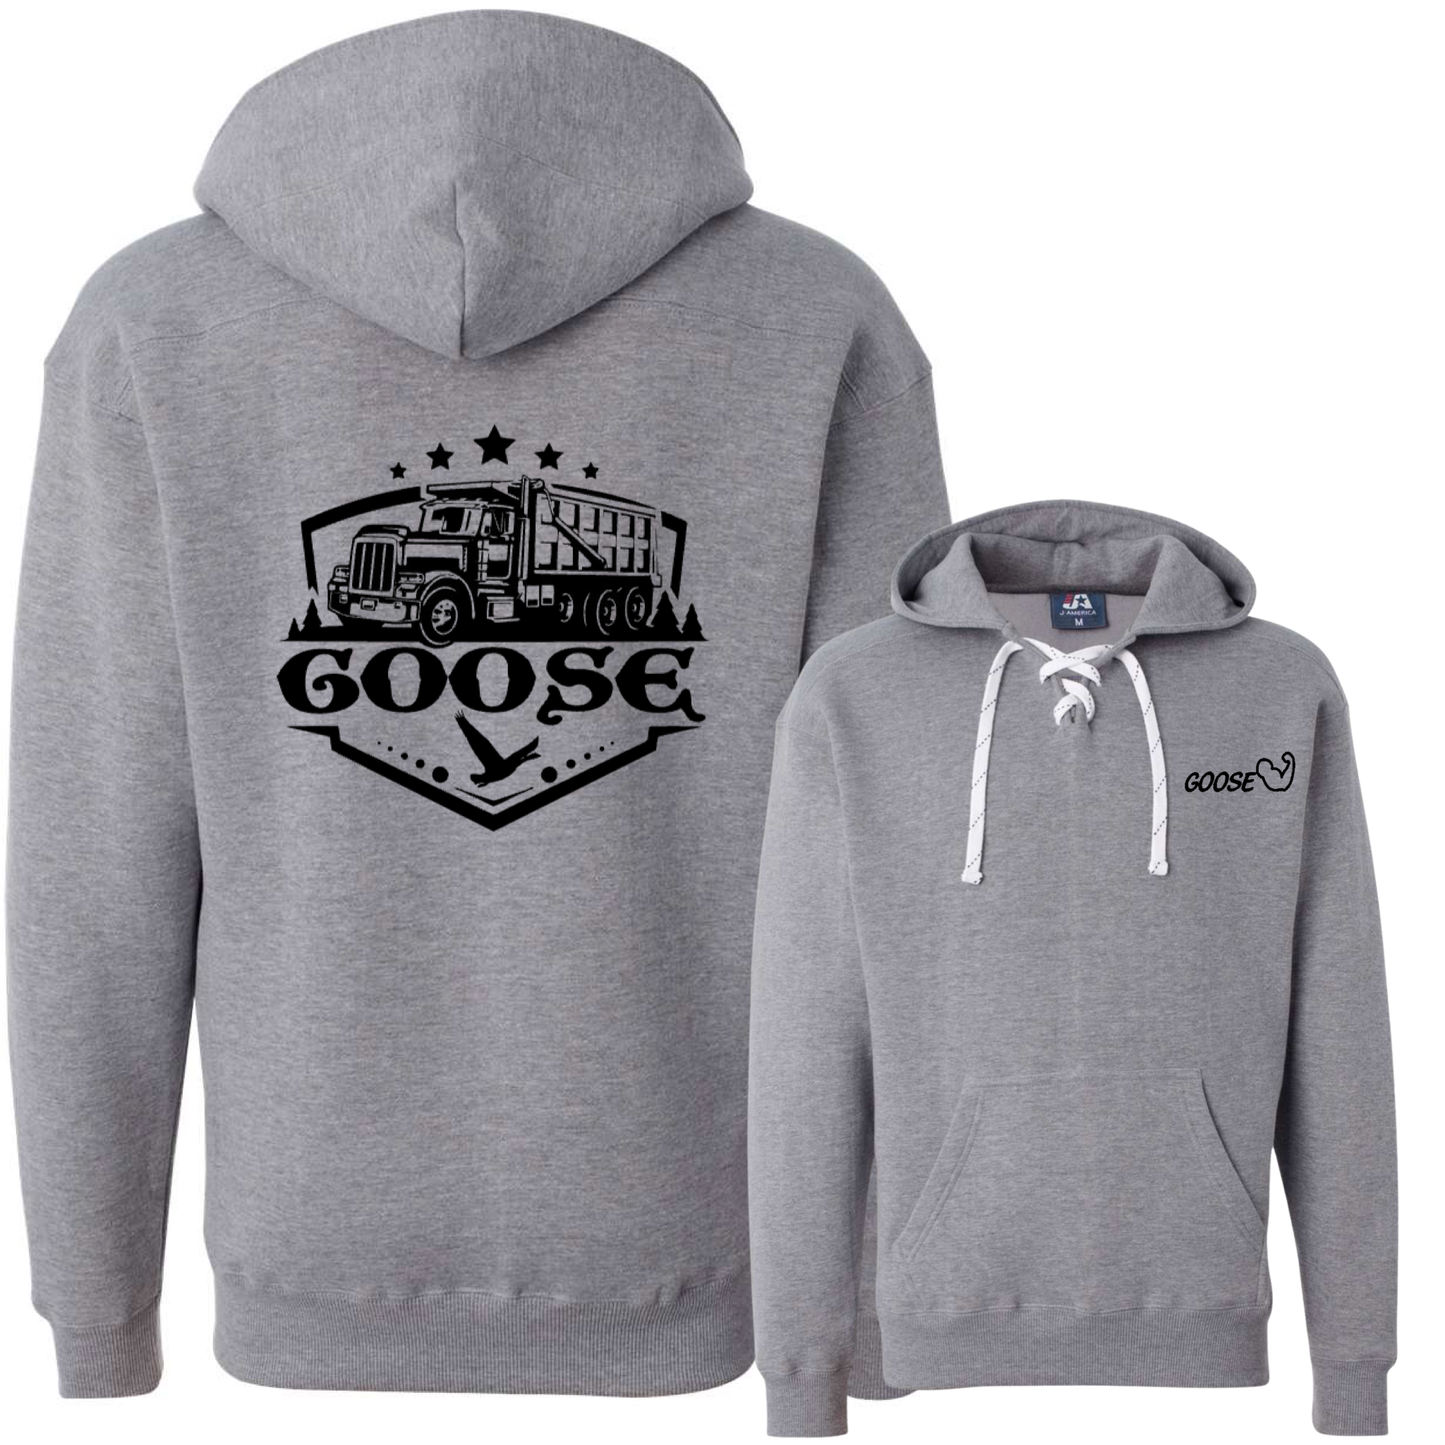 Goose Lace Up Hoodies